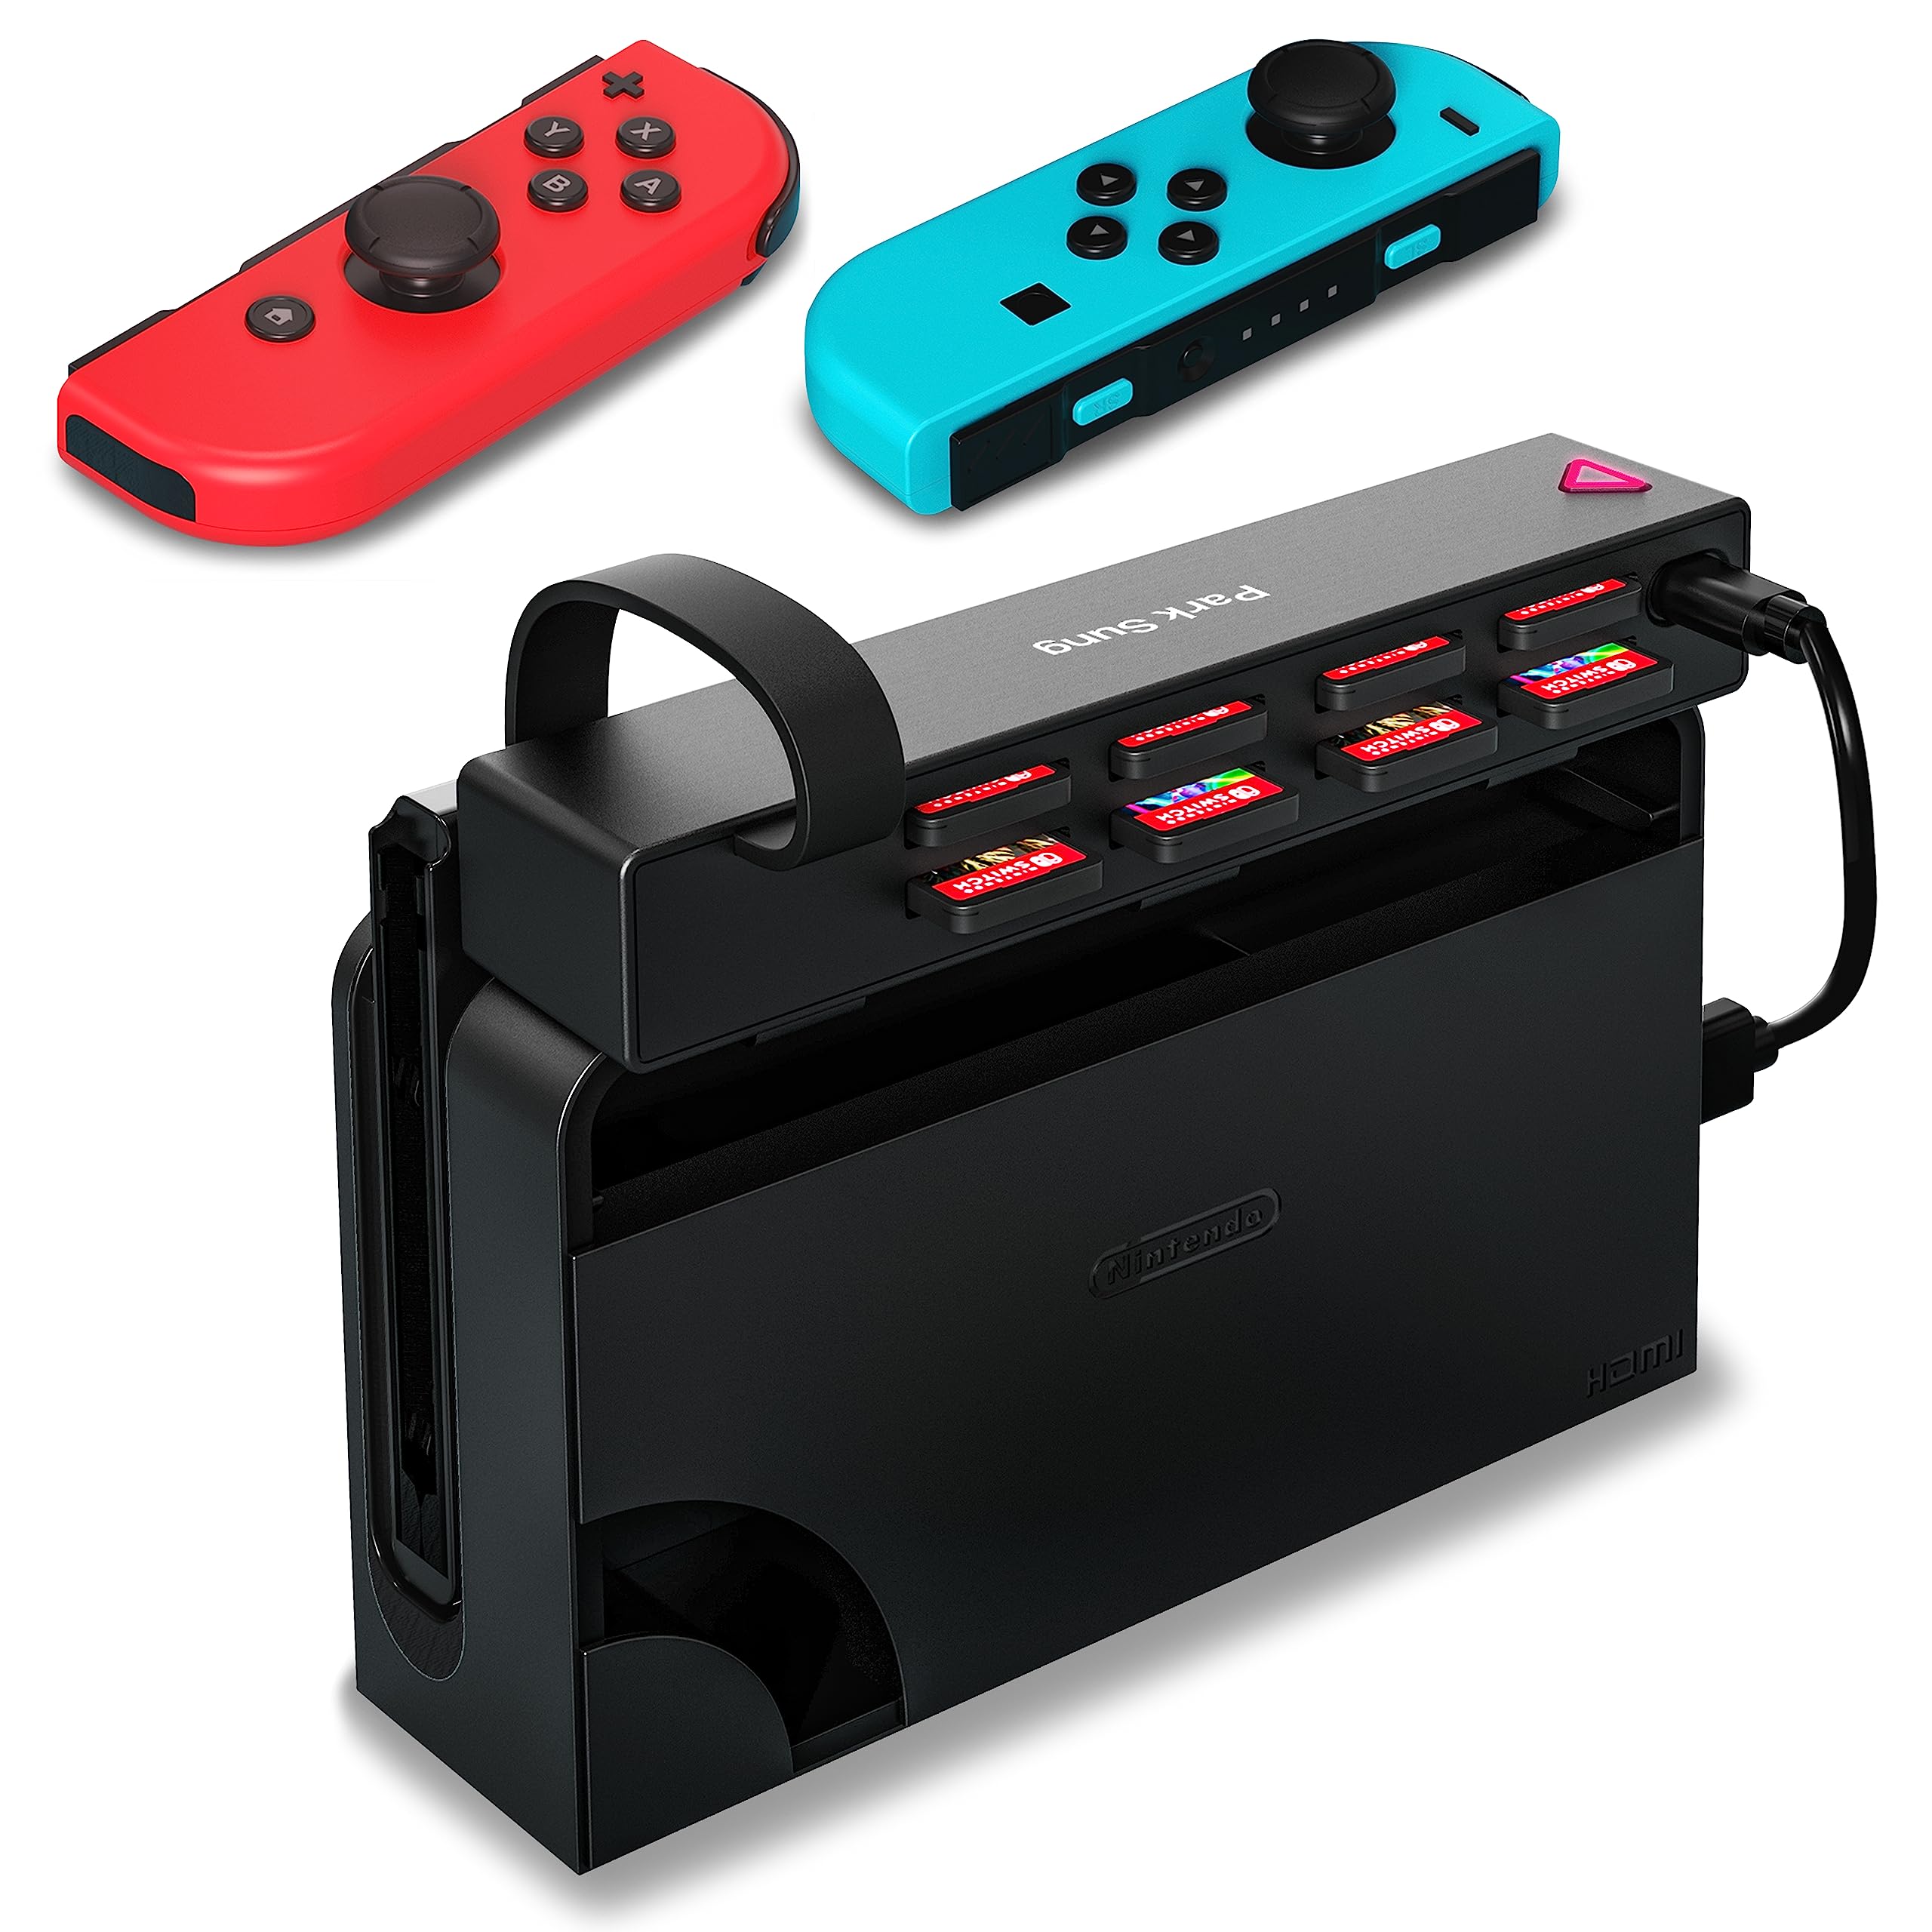 Nintendo Switch console and Wi-Fi signal bars